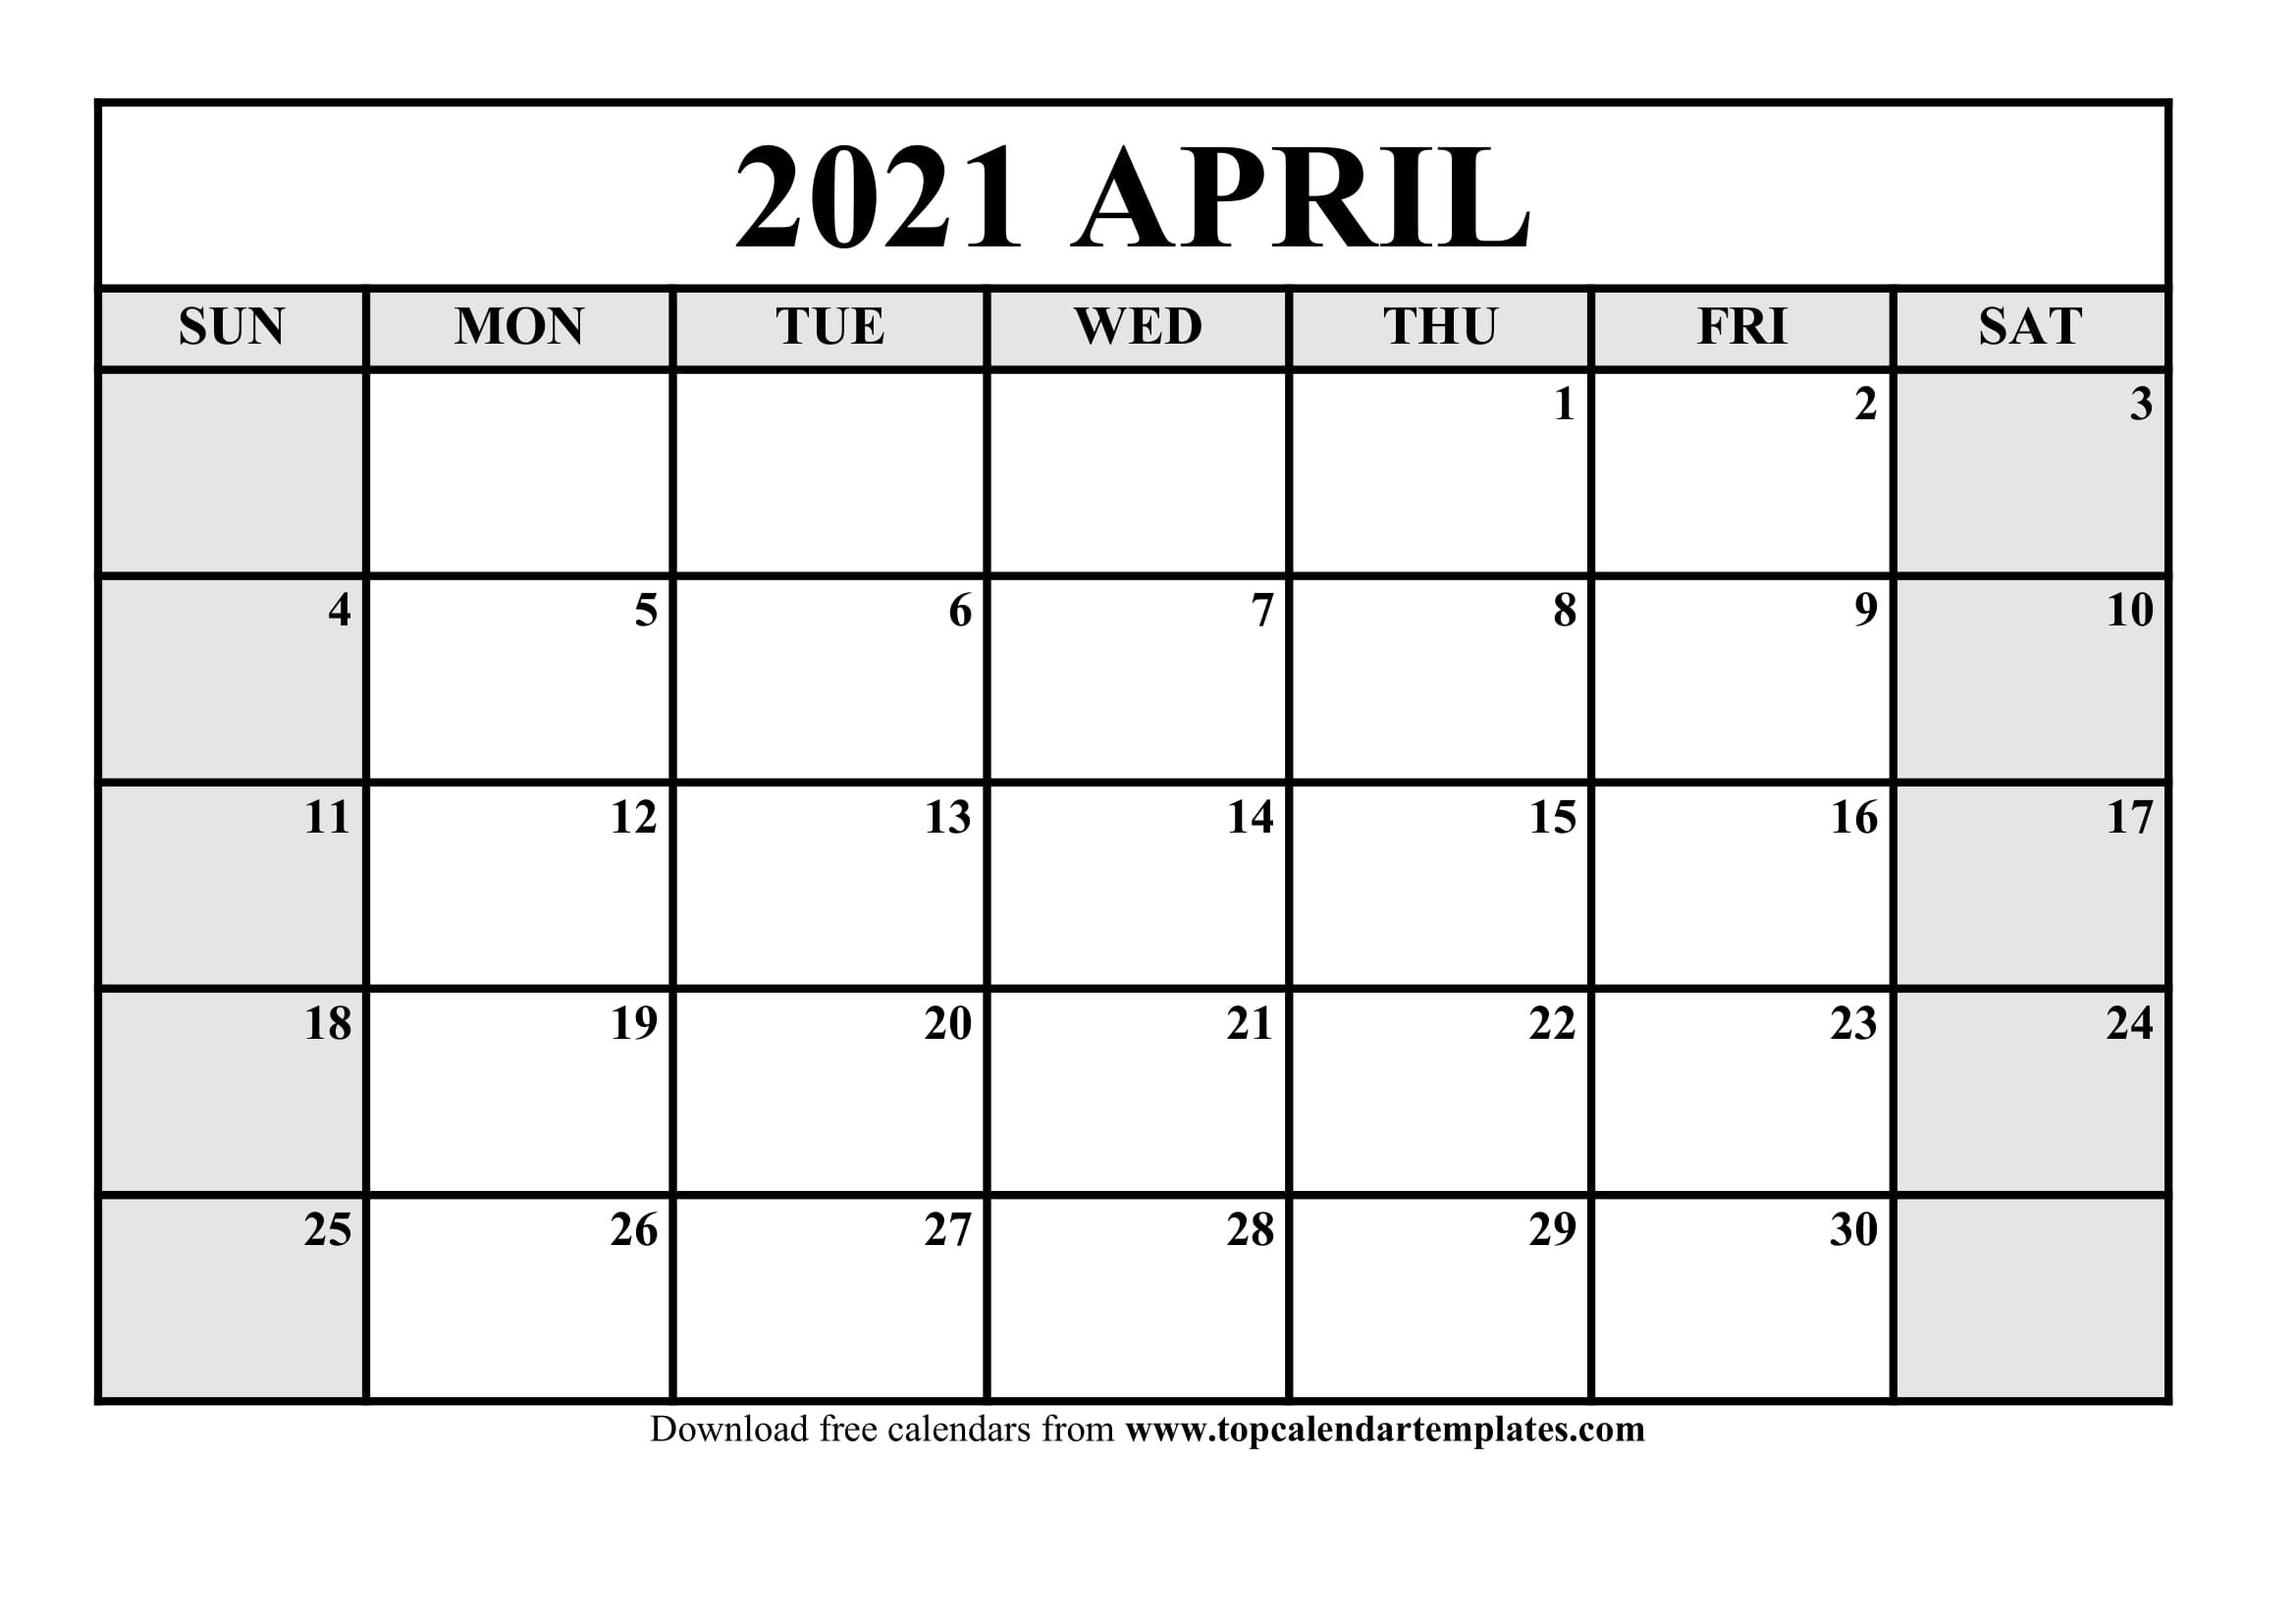 Free April 2021 Printable Calendar In Editable Format-Printable Calendar 2021 Monthly That Can Be Edited